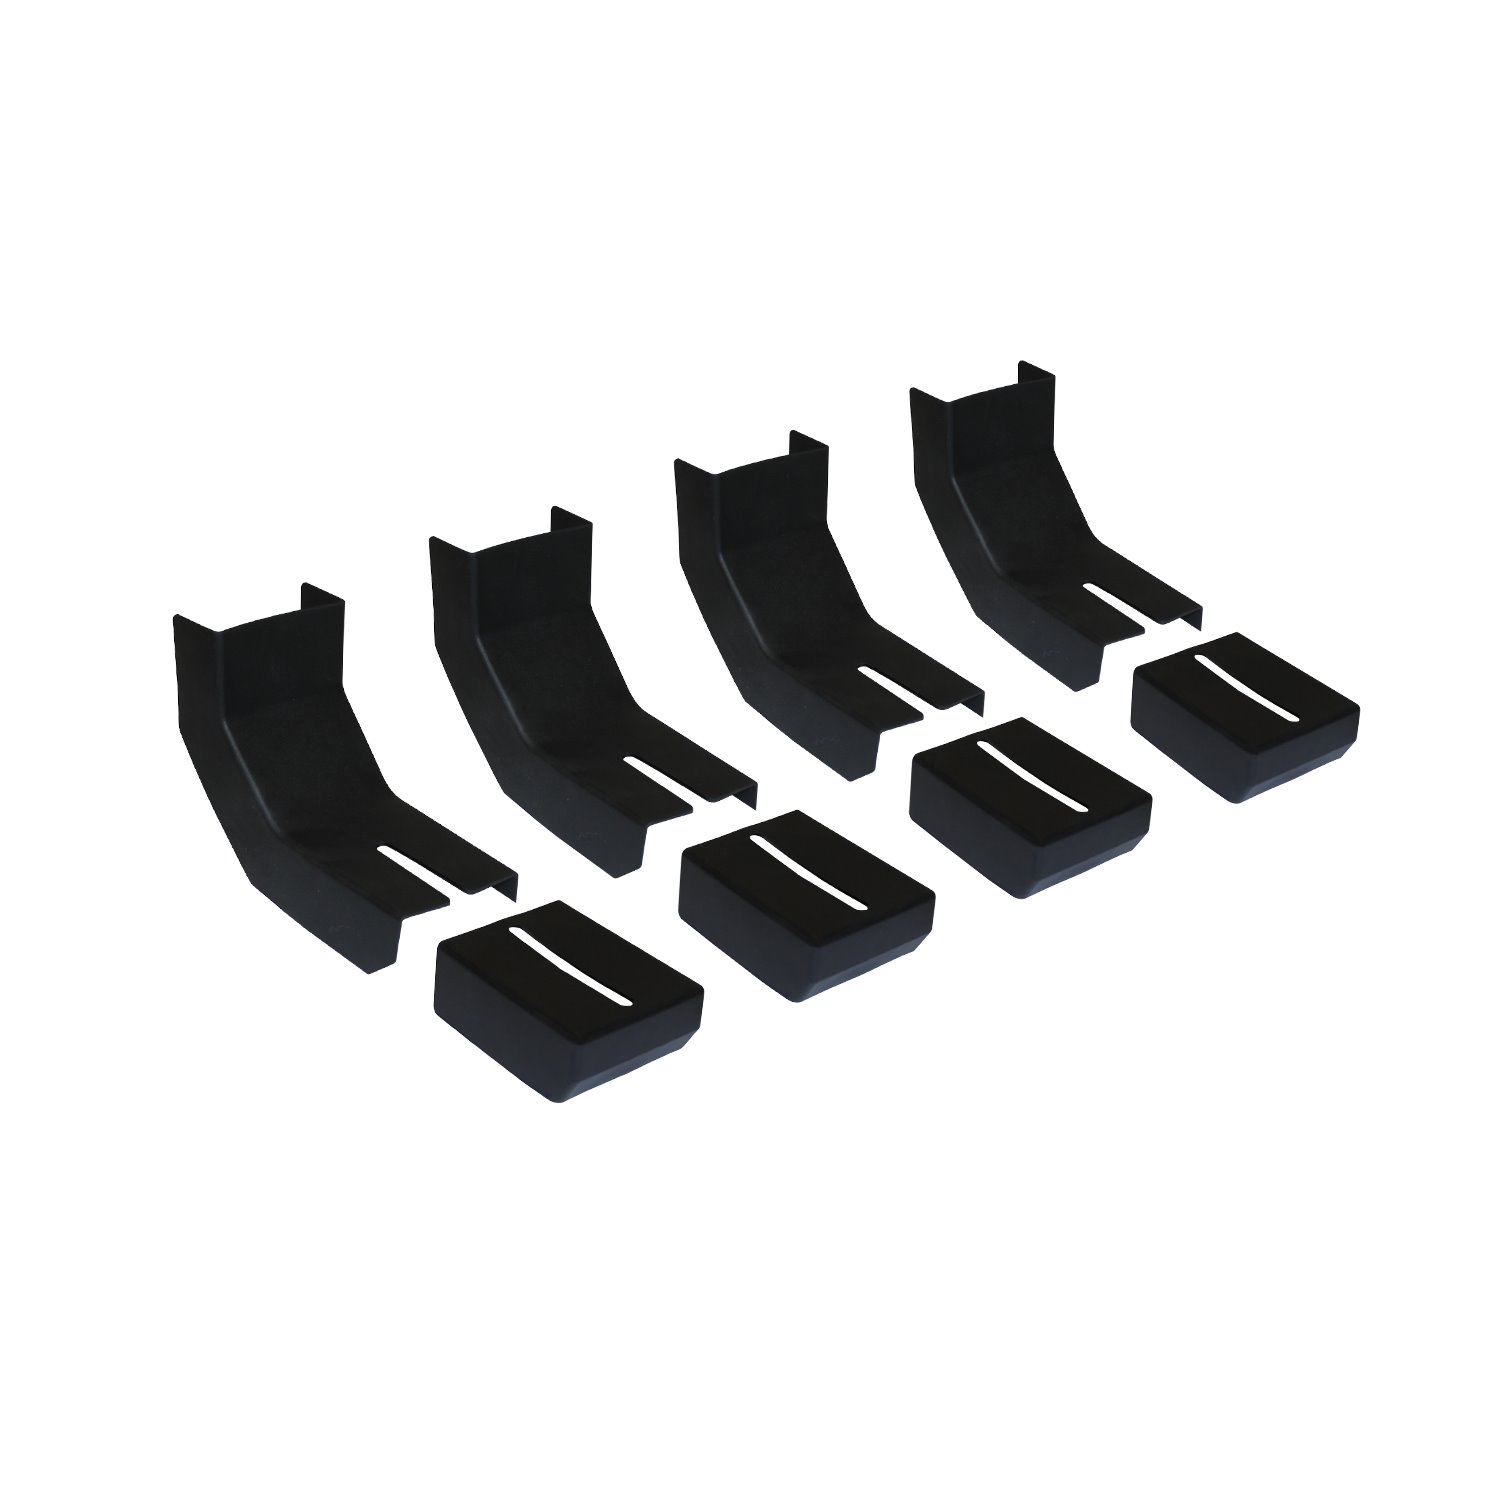 RB-BKC4 Raptor Series Bracket Covers Thermoplastic Rubber for Raptor Series Slide Track Running Boards Only, Qty 4 Set